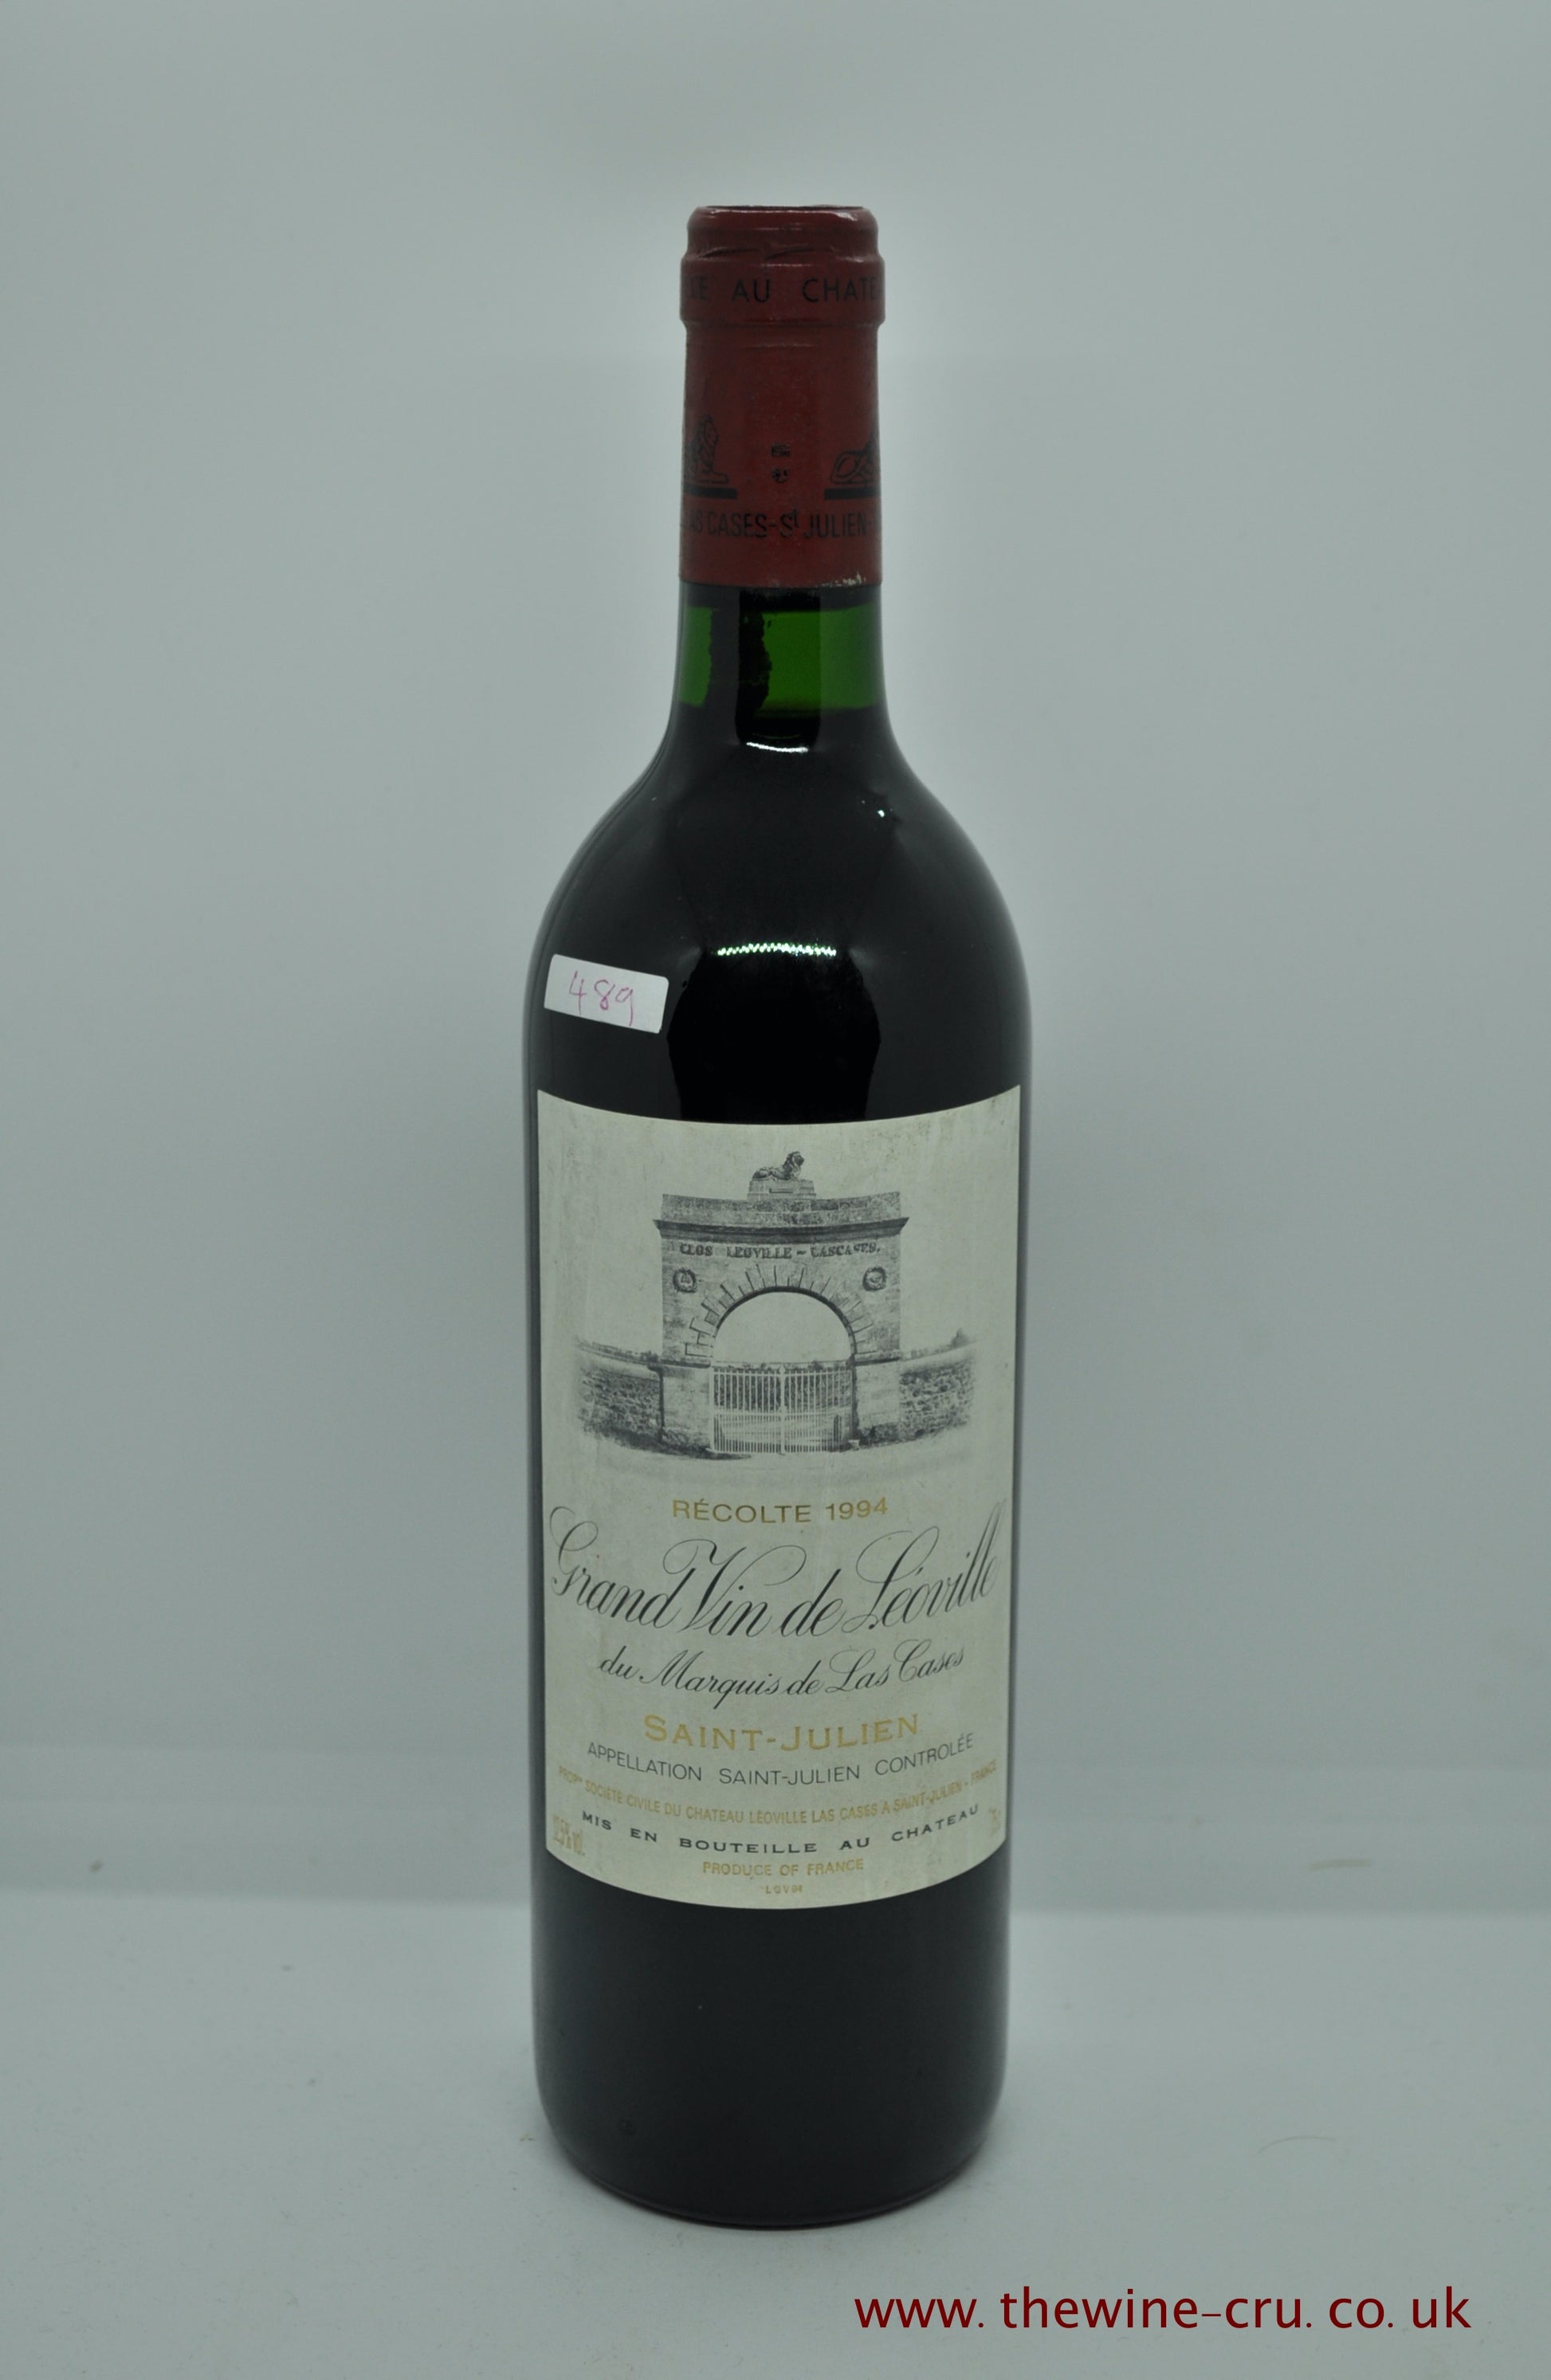 1994 vintage red wine. Chateau Leoville Las Cases.France, Bordeaux. The bottle is in good condition with the level in neck. Immediate delivery. Free local delivery. Gift wrapping available.